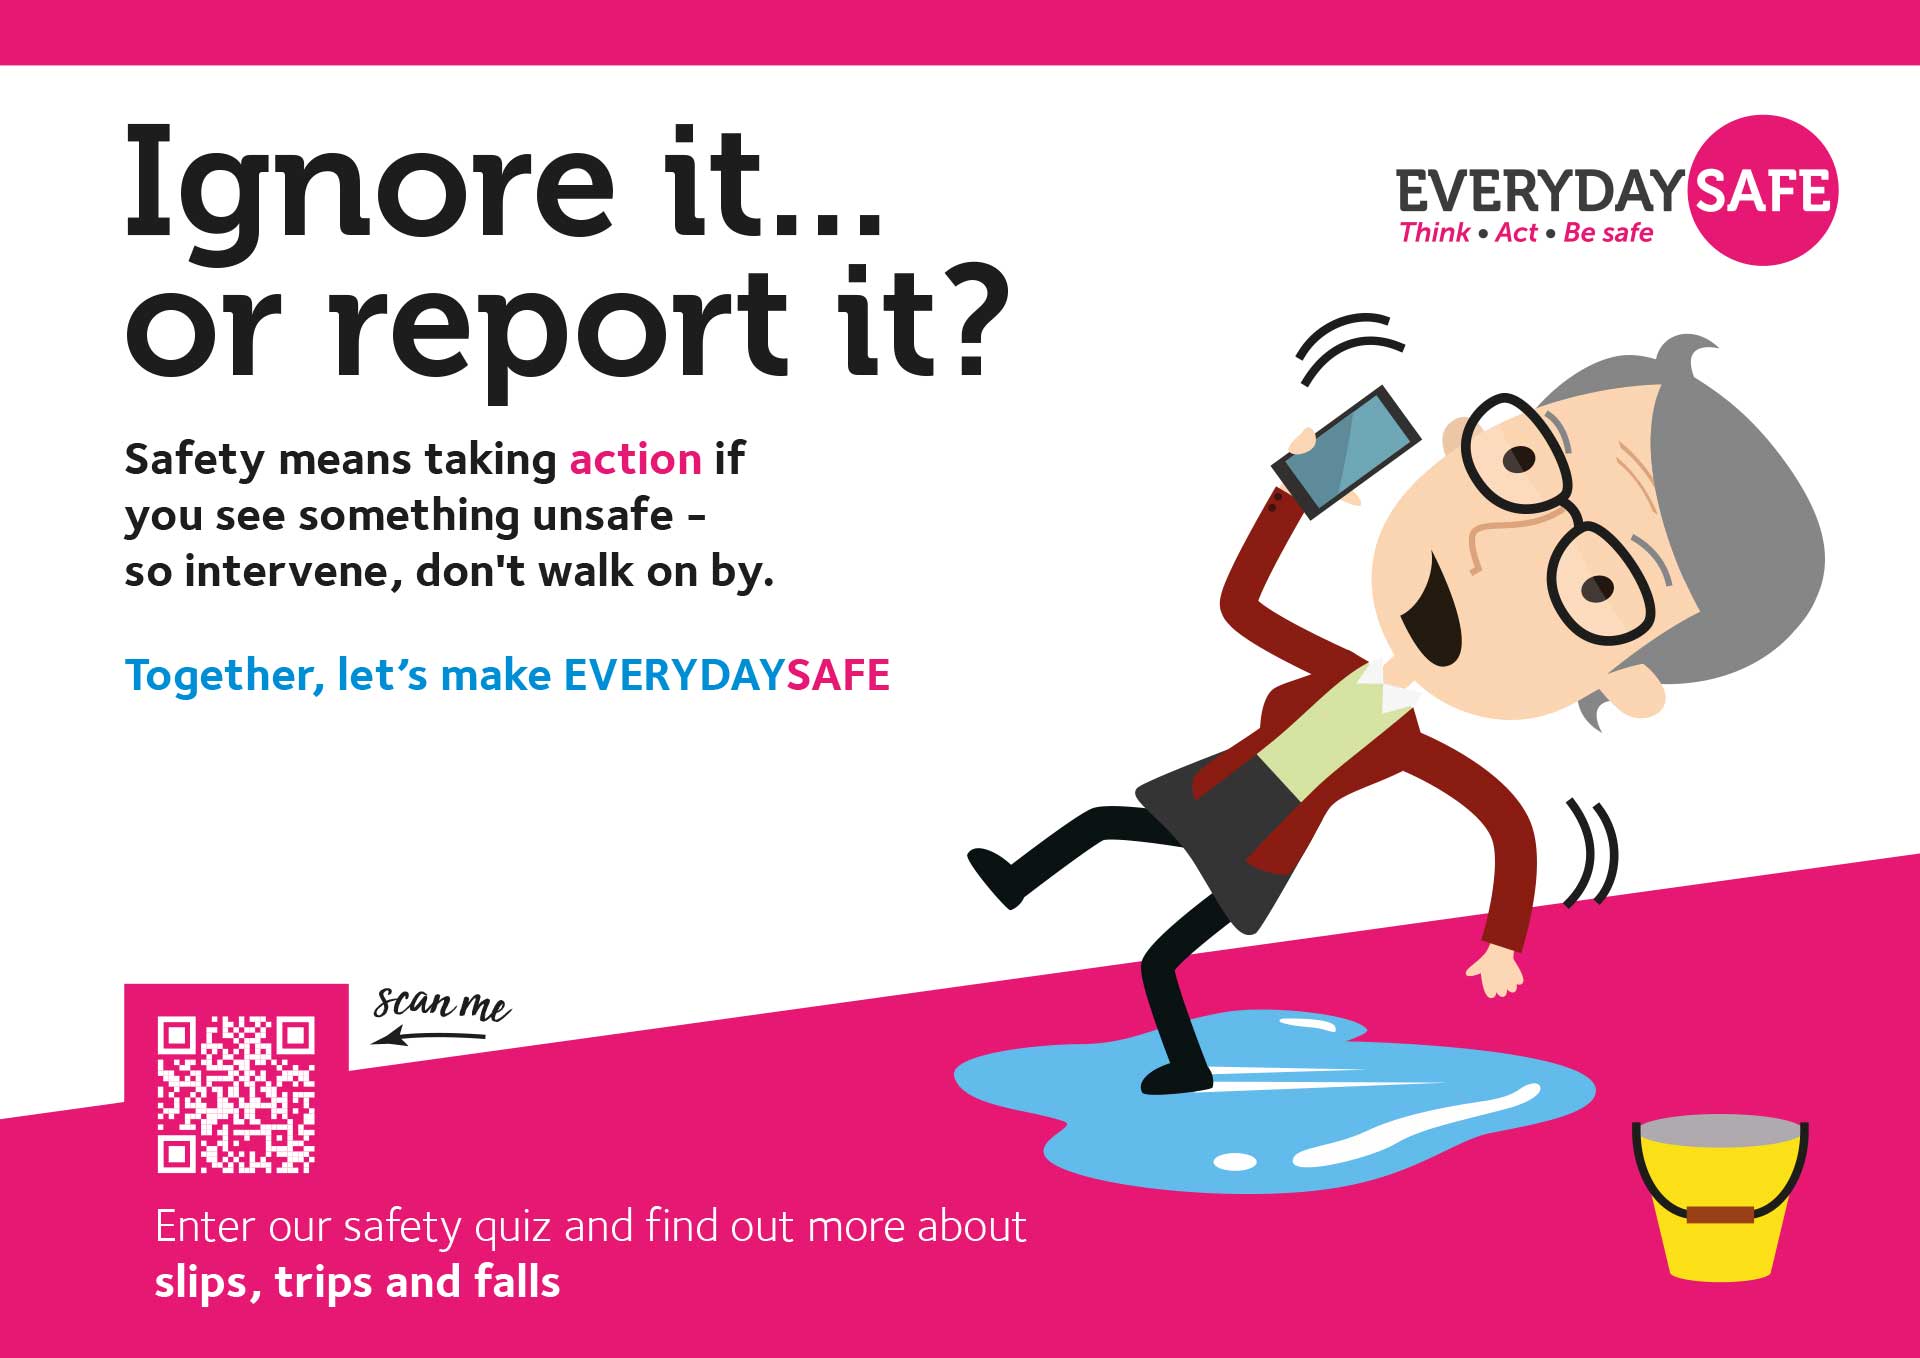 EveryDaySafe poster highlighting the value of action